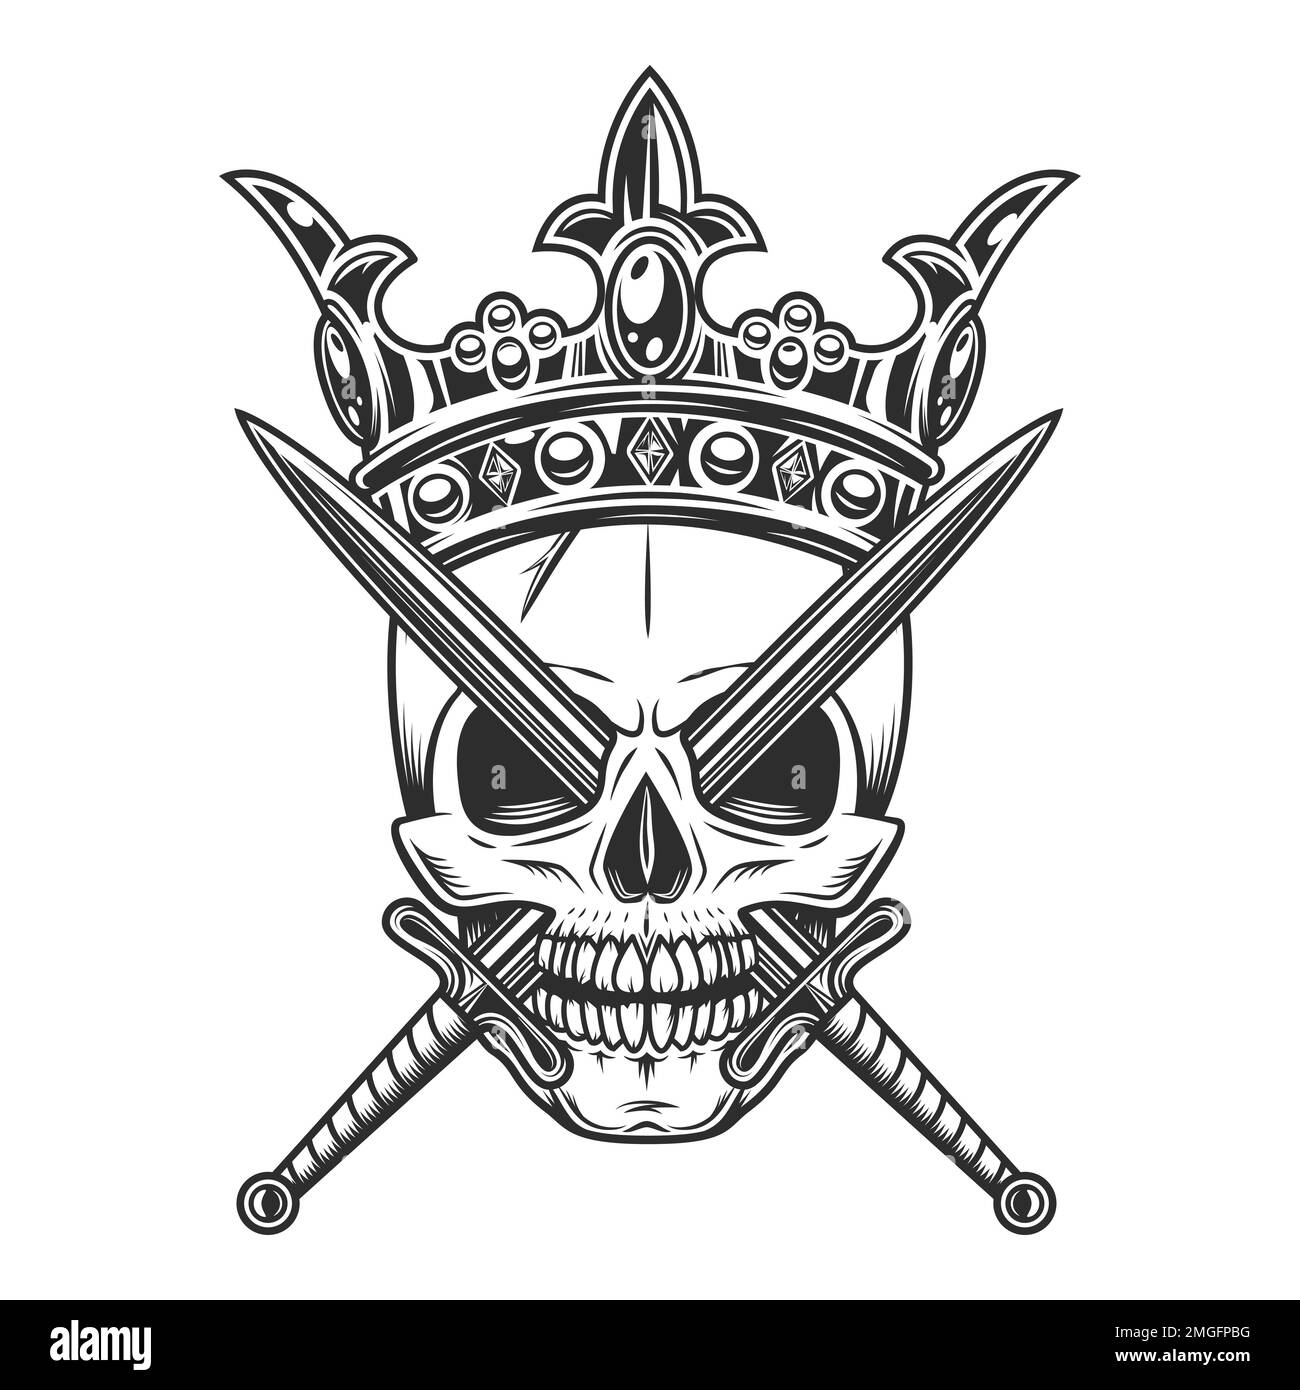 Skull in crown king with crossed swords isolated illustration on white background. Vintage crowning, elegant queen or king crowns, royal imperial Stock Photo